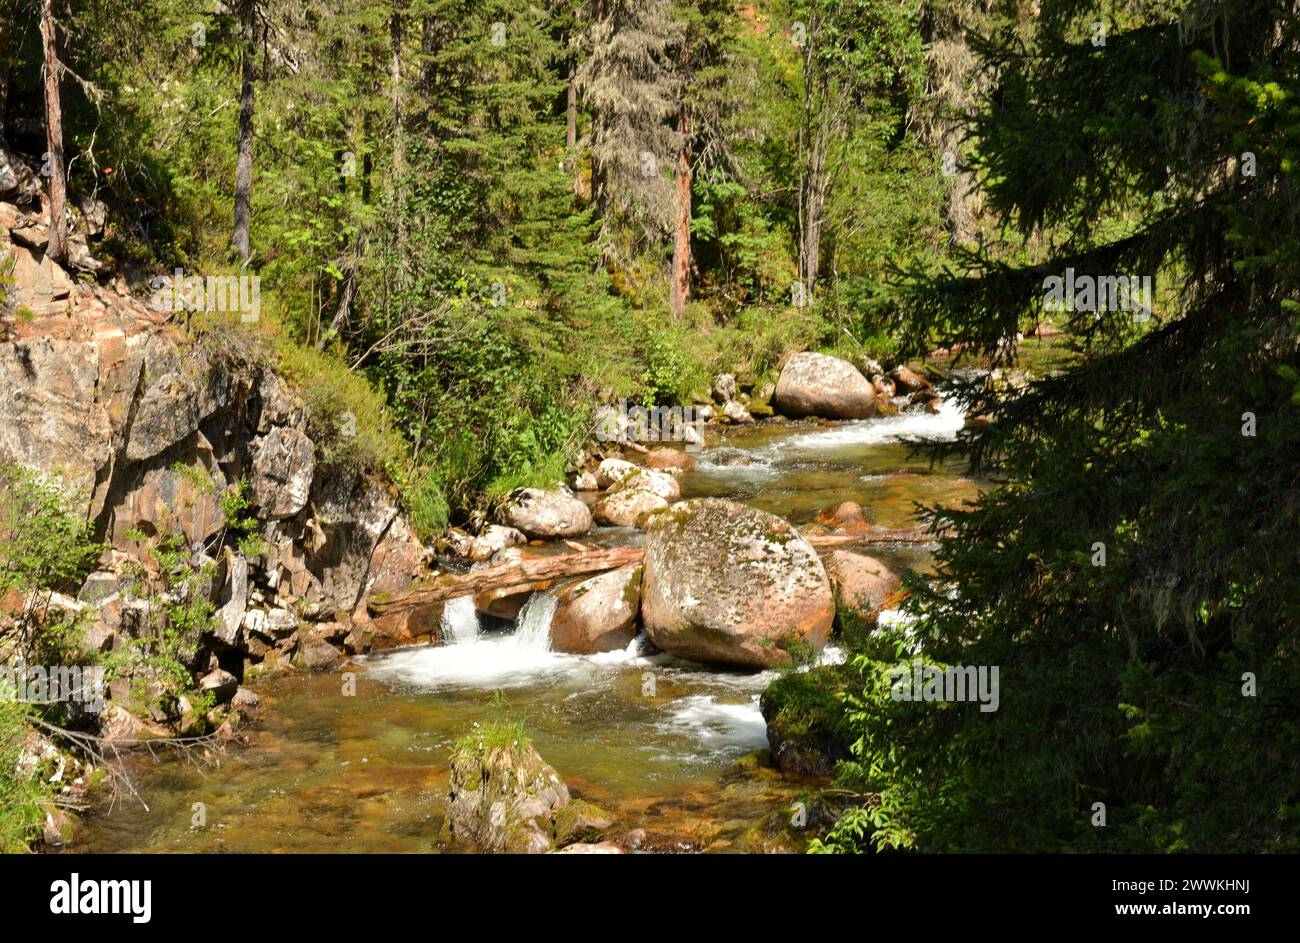 A small rushing mountain stream flows through a dense coniferous forest, skirting stones and fallen trees on a sunny summer day. Taigish River, Ergaki Stock Photo